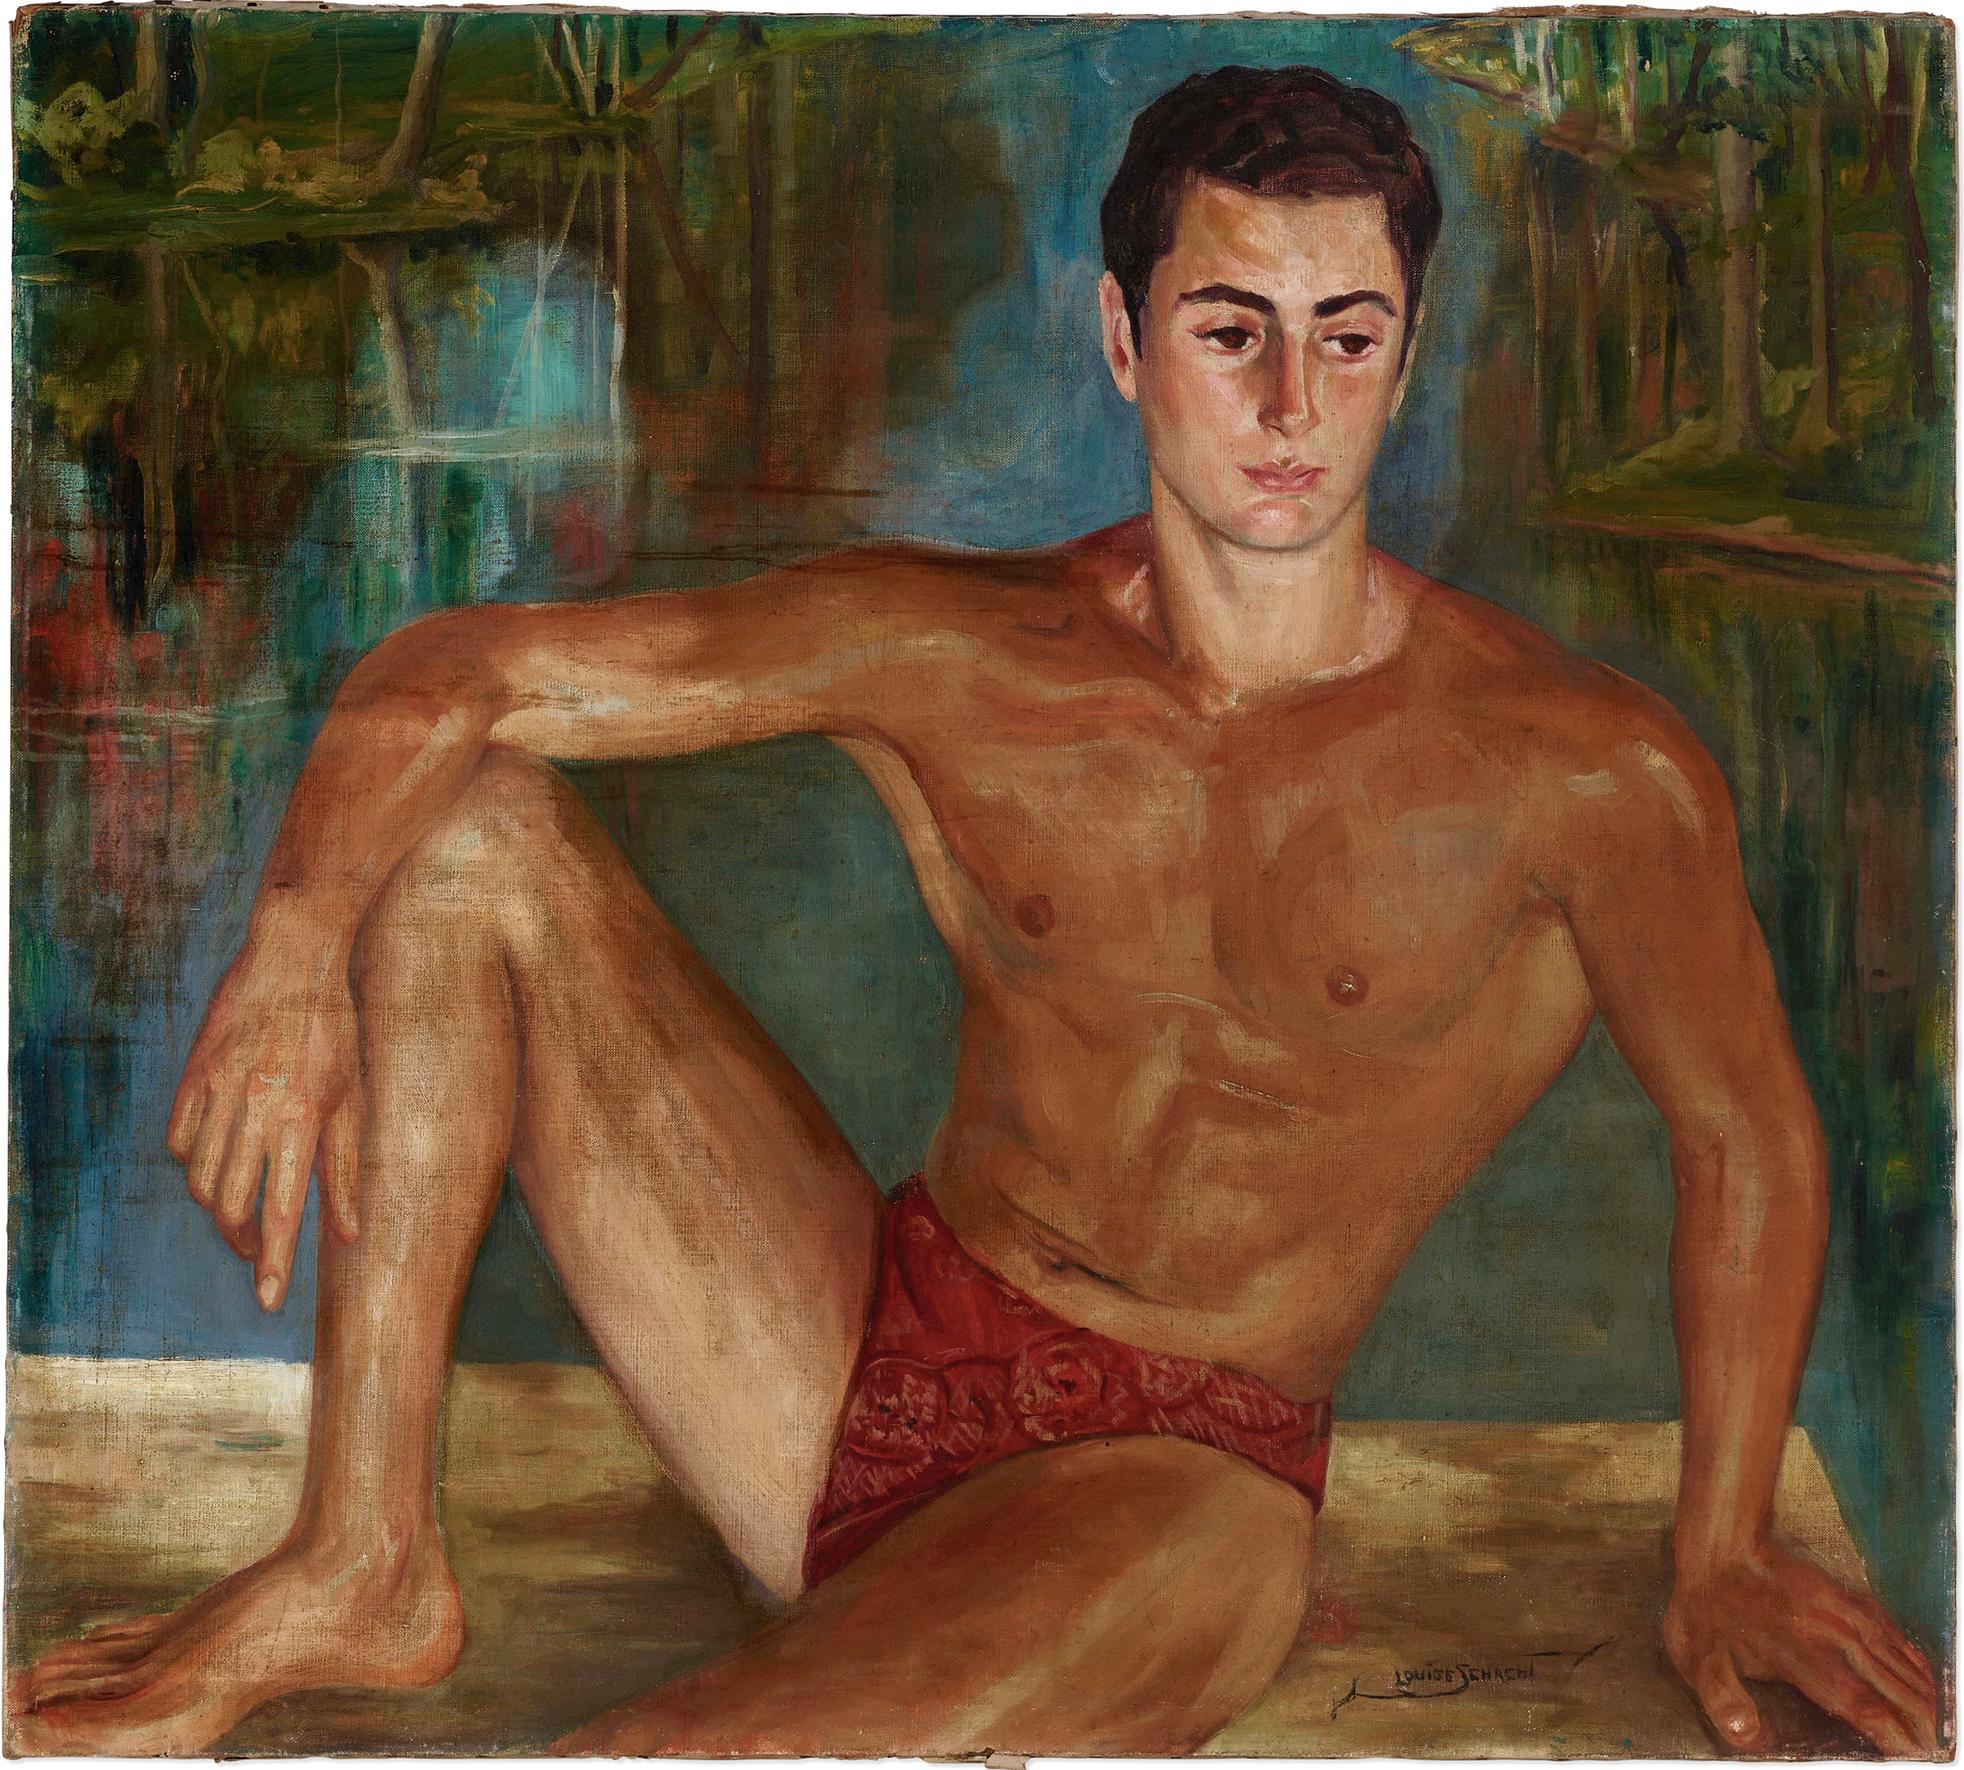 Louise Schacht Nude Painting - Nude Man In Bathing Suit,  Male Nude in Speedo, Gay art,  Sex appeal